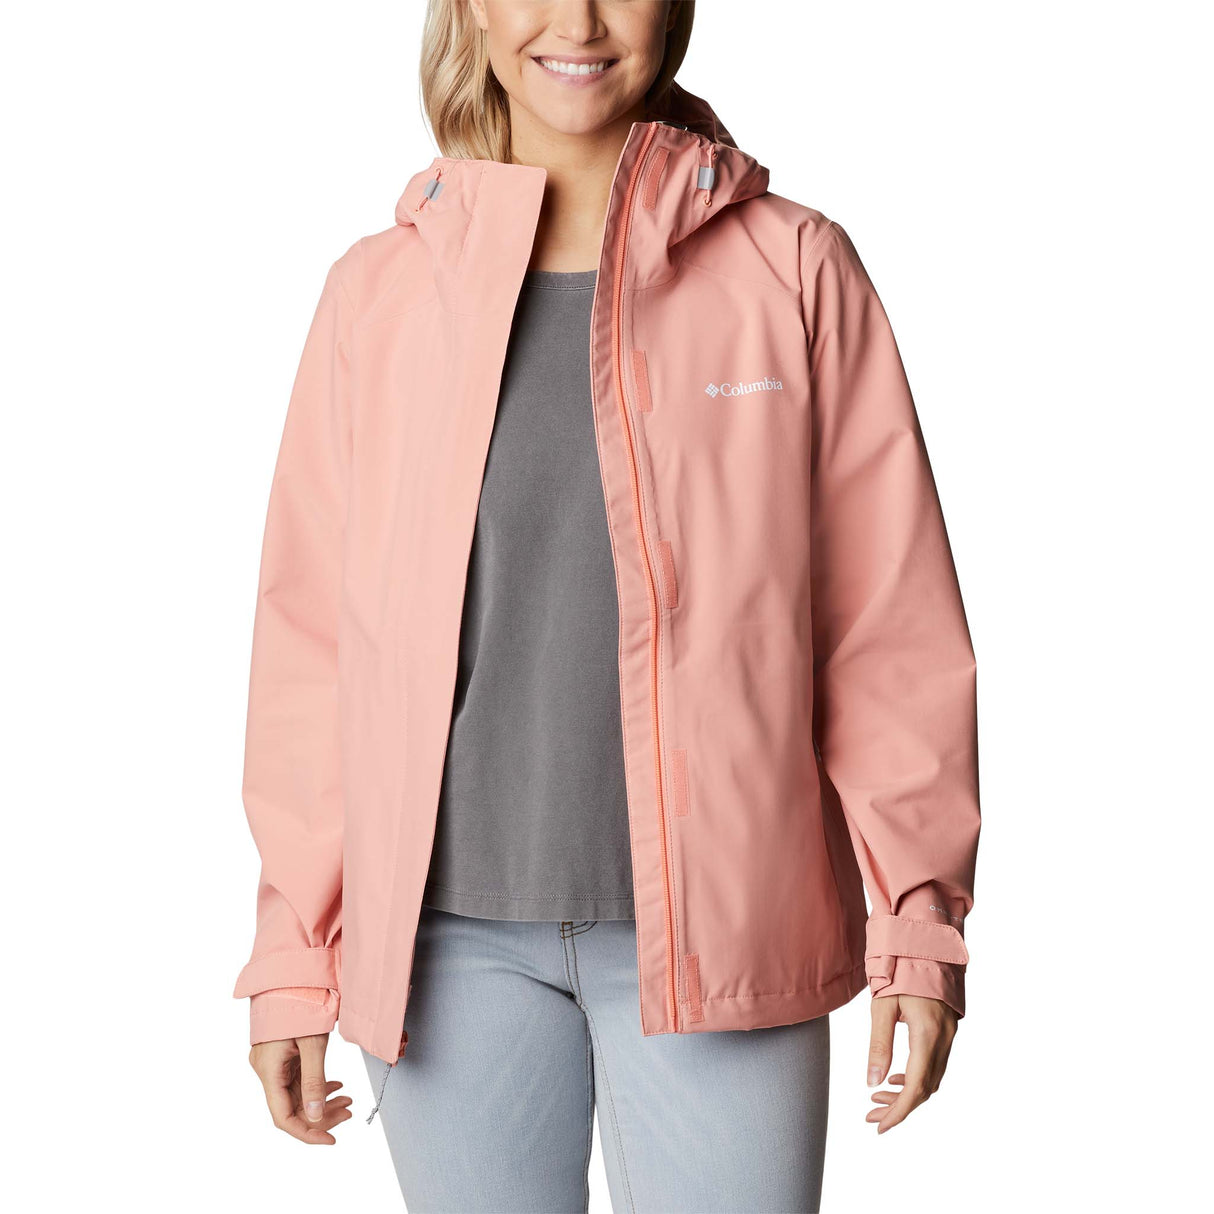 Columbia Earth Explorer Shell manteau coquille coral reef femme ouvert